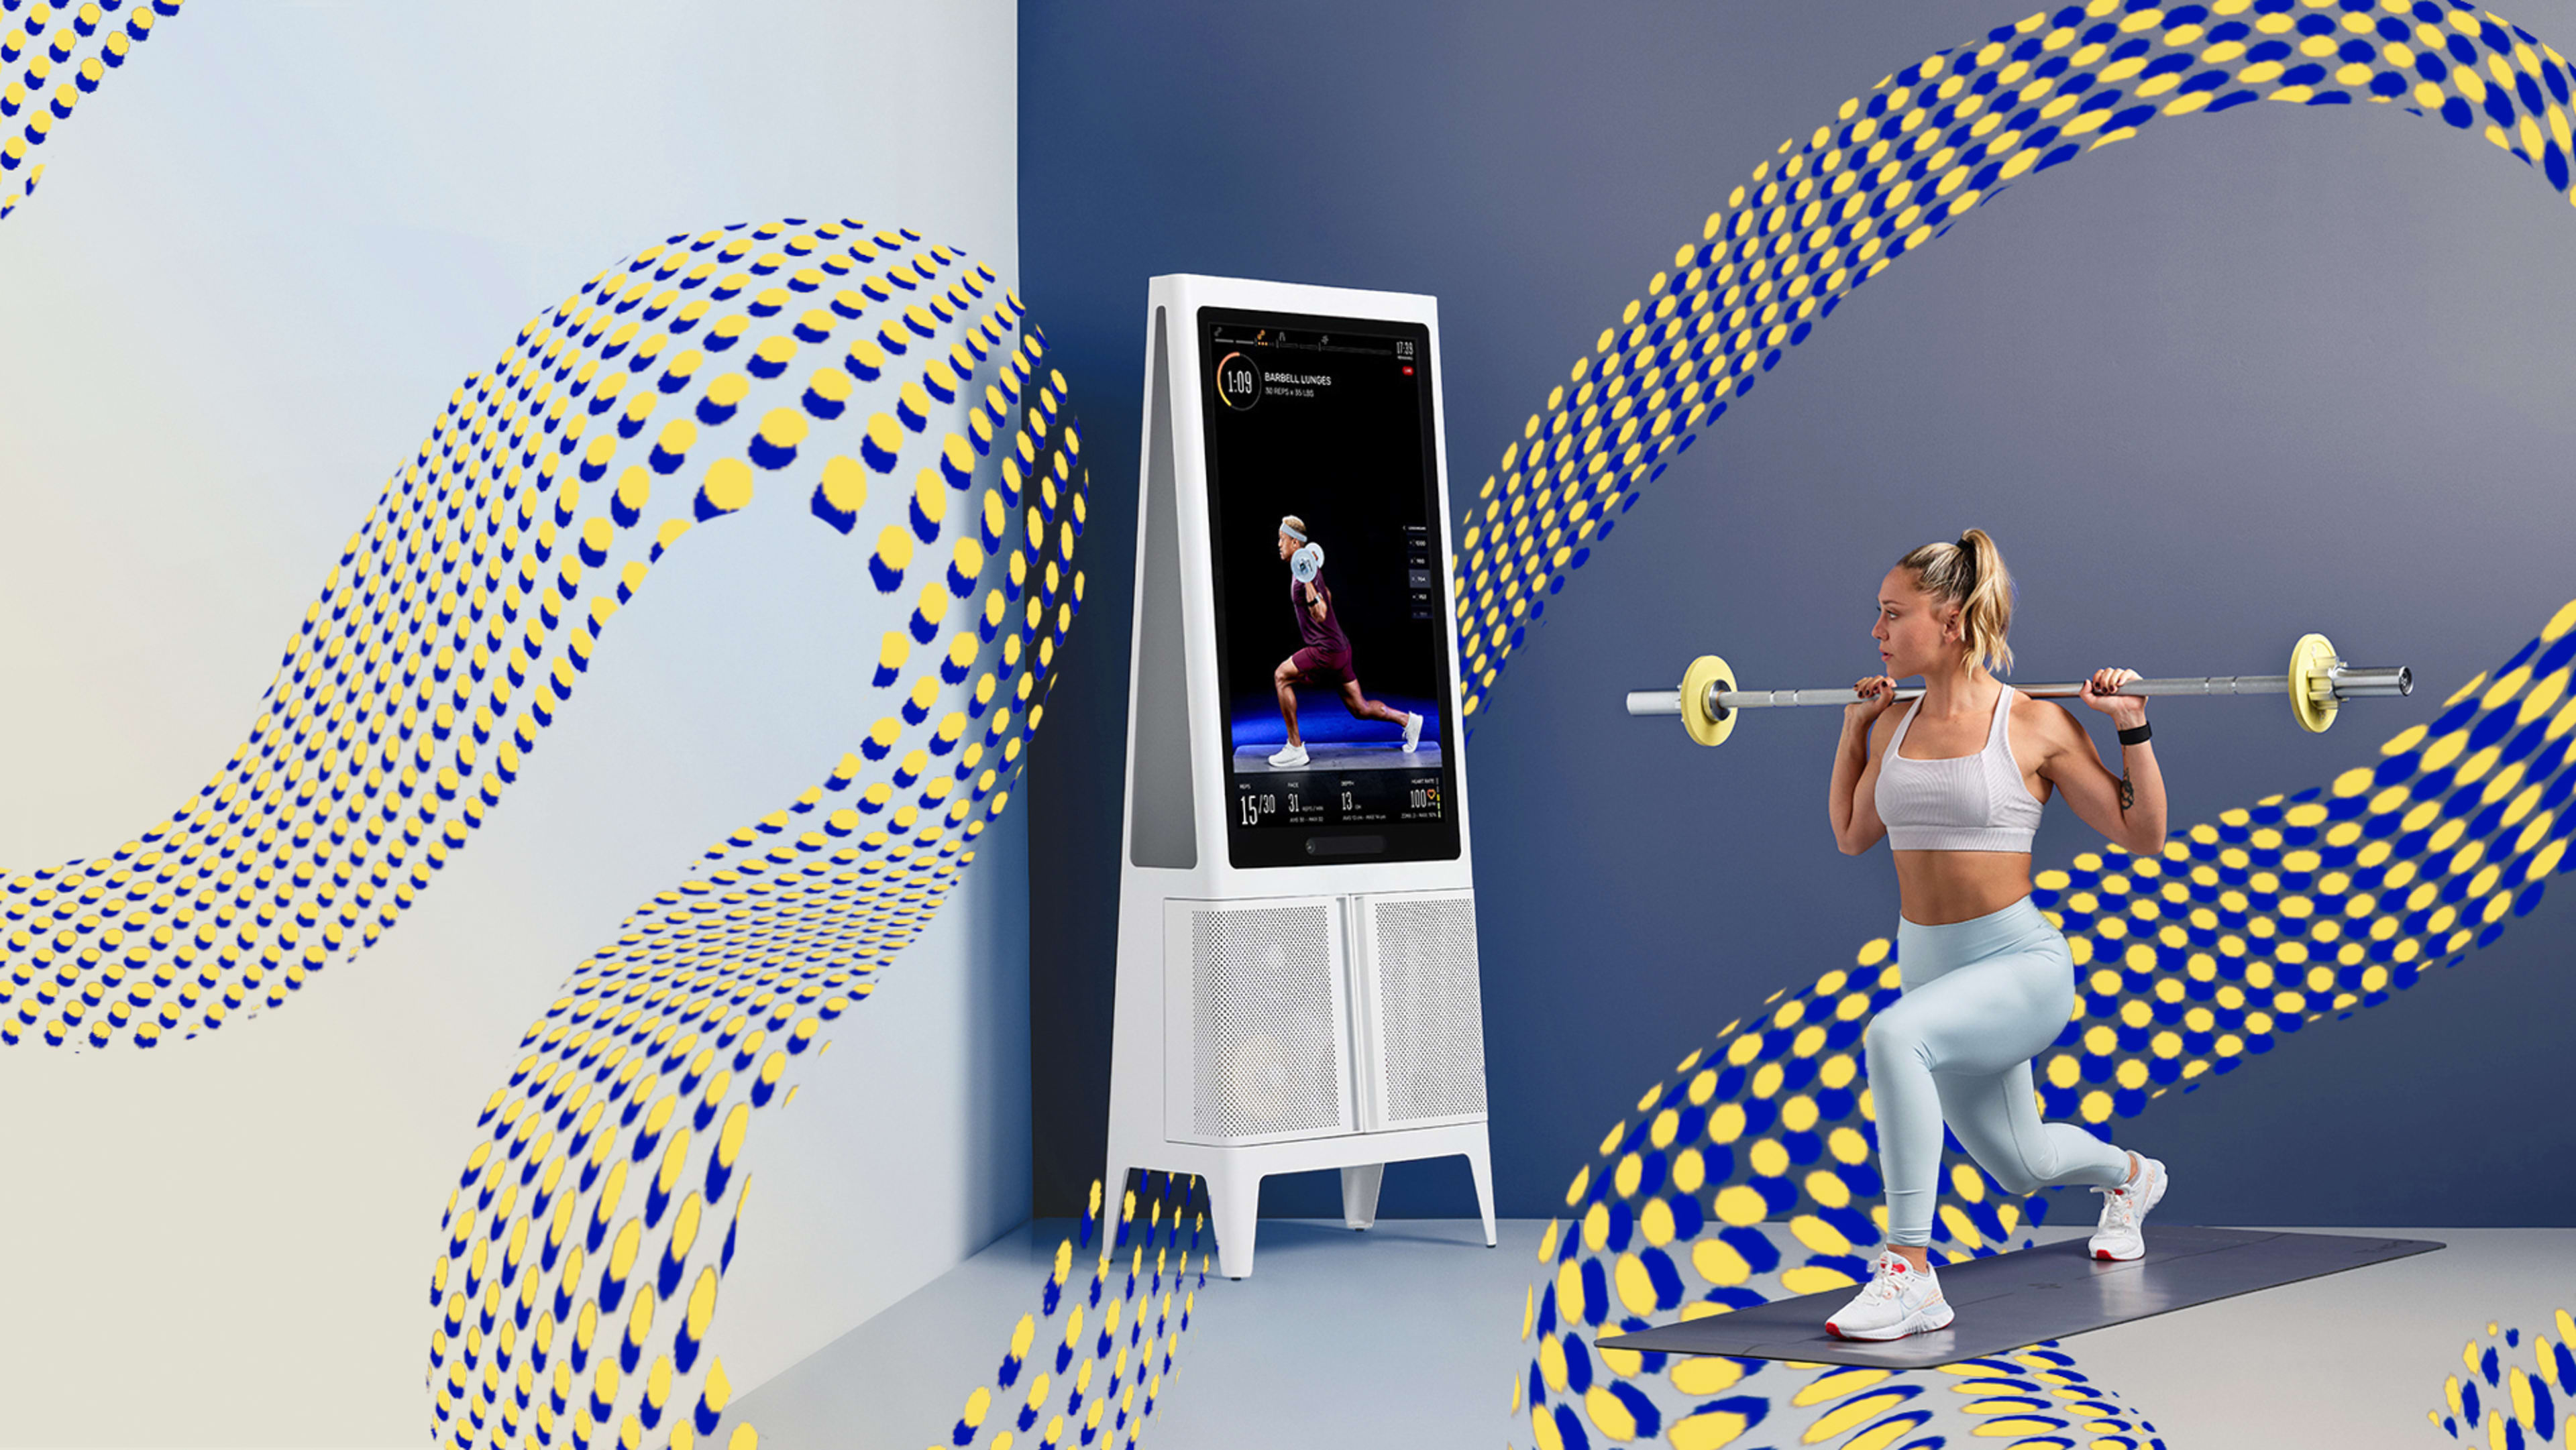 This AI-powered home gym is like having a personal trainer in your living room